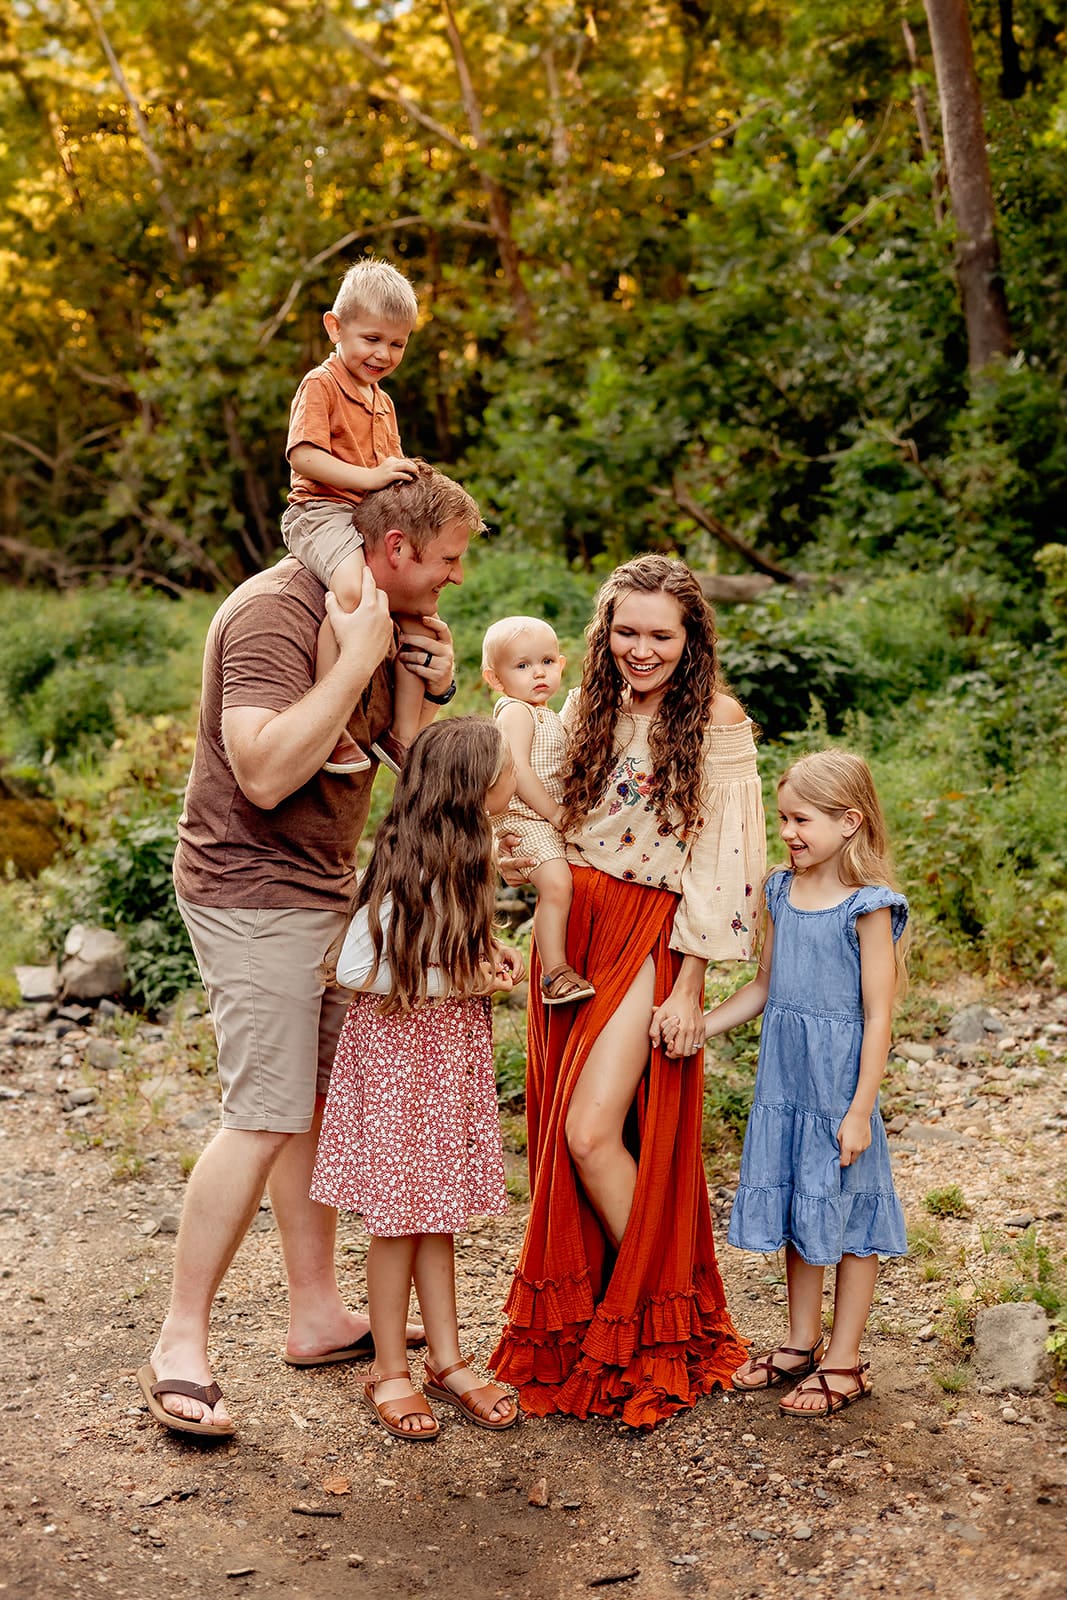 Family of five with young children posing together in a lush outdoor setting, showcasing a casual and intimate family portrait by a lifestyle photographer.